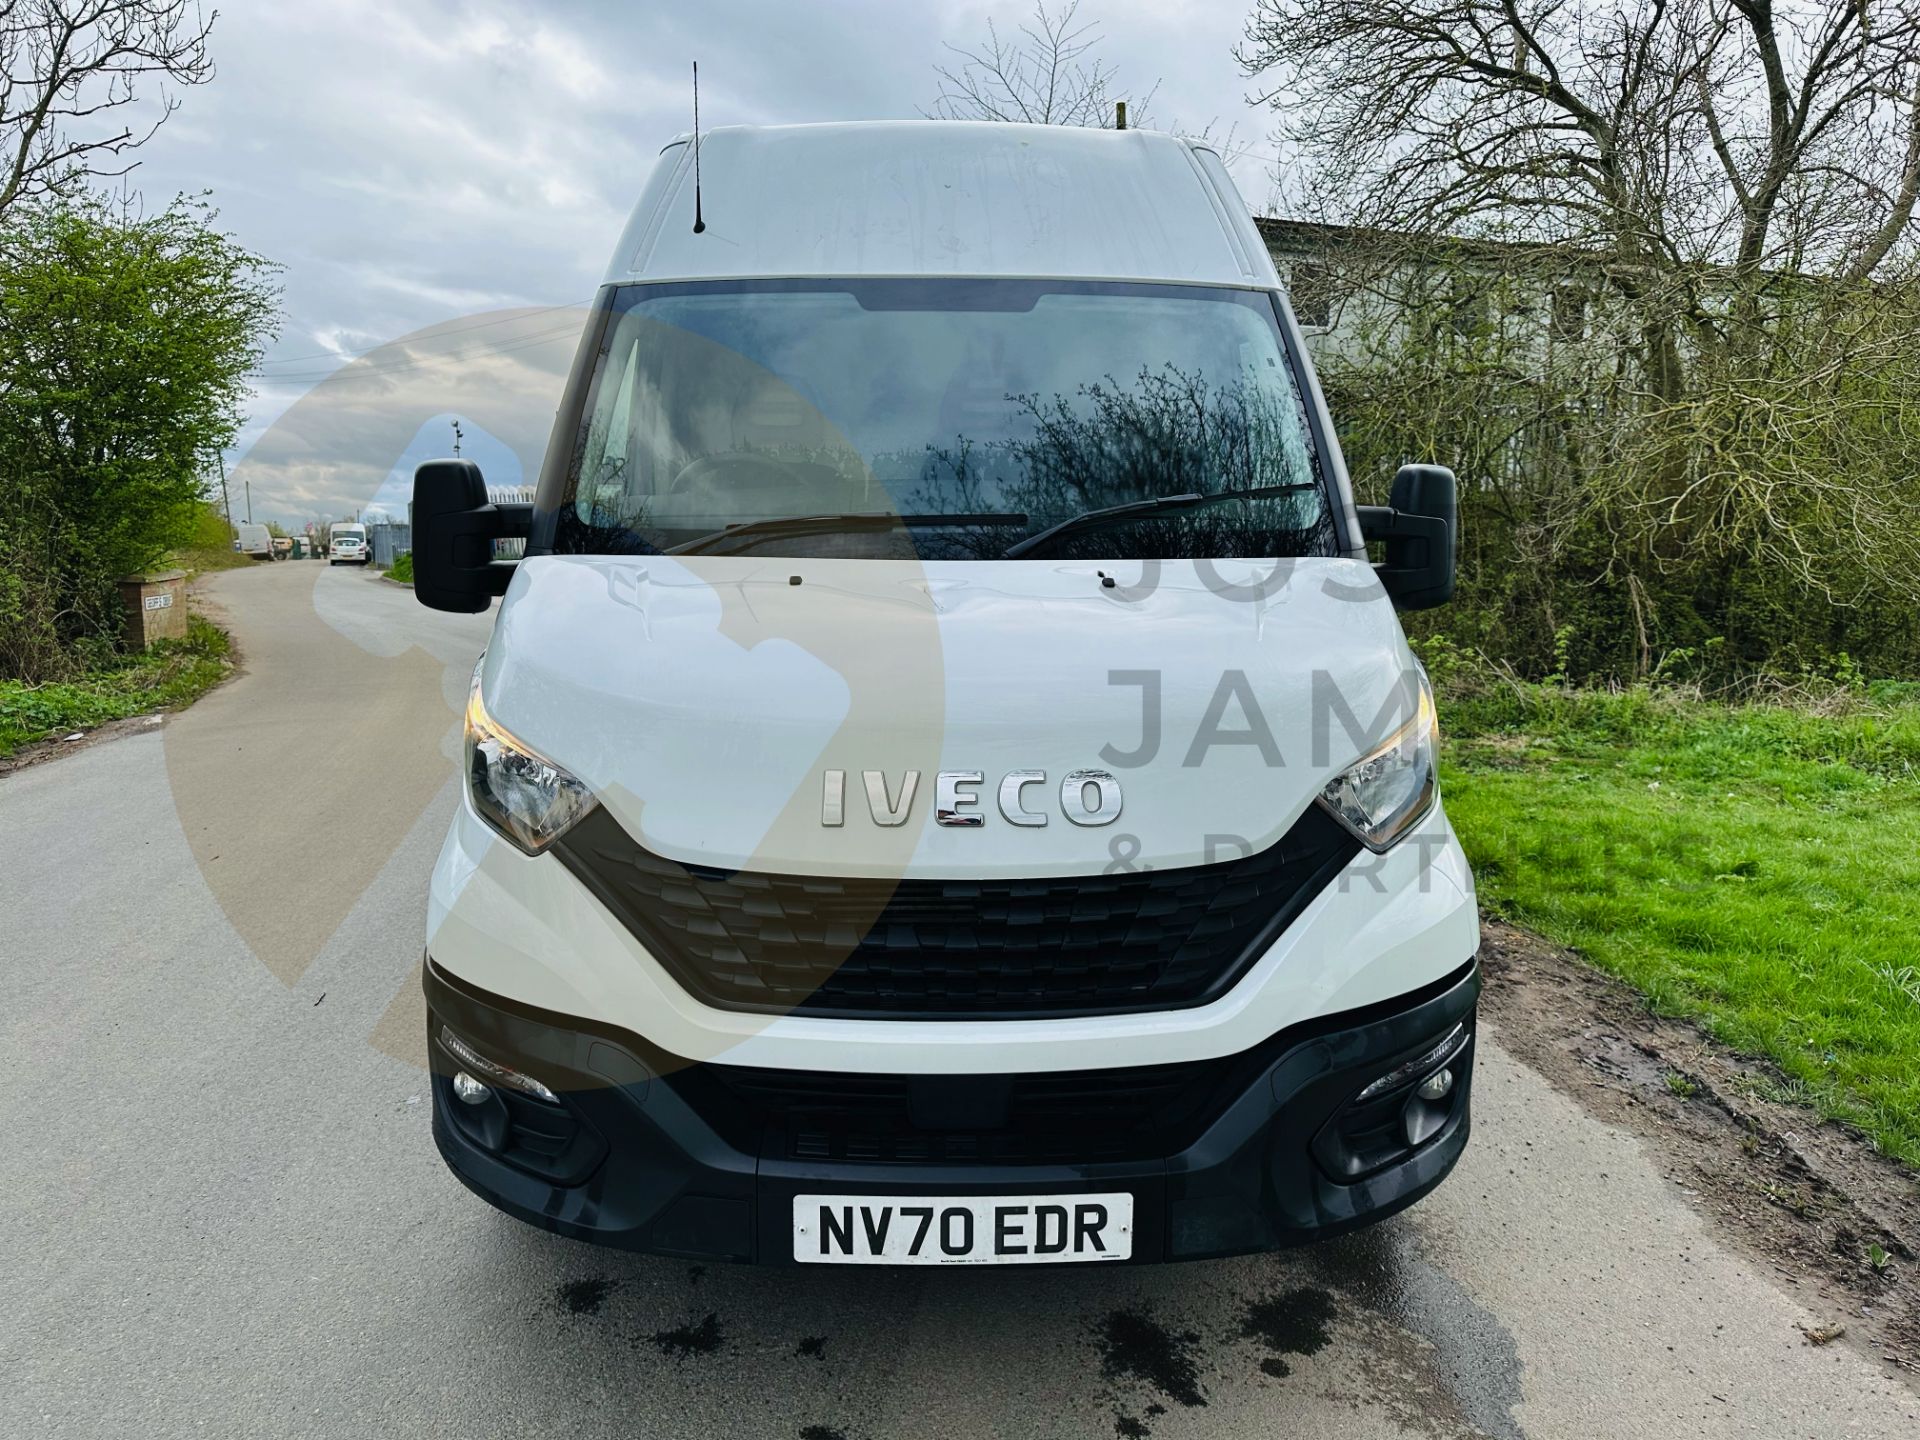 IVECO DAILY 35-140 LONG WHEEL BASE HIFG ROOF - 2021 REG (NEW SHAPE) ONLY 85K MILES - AIR CON - LOOK! - Bild 3 aus 30